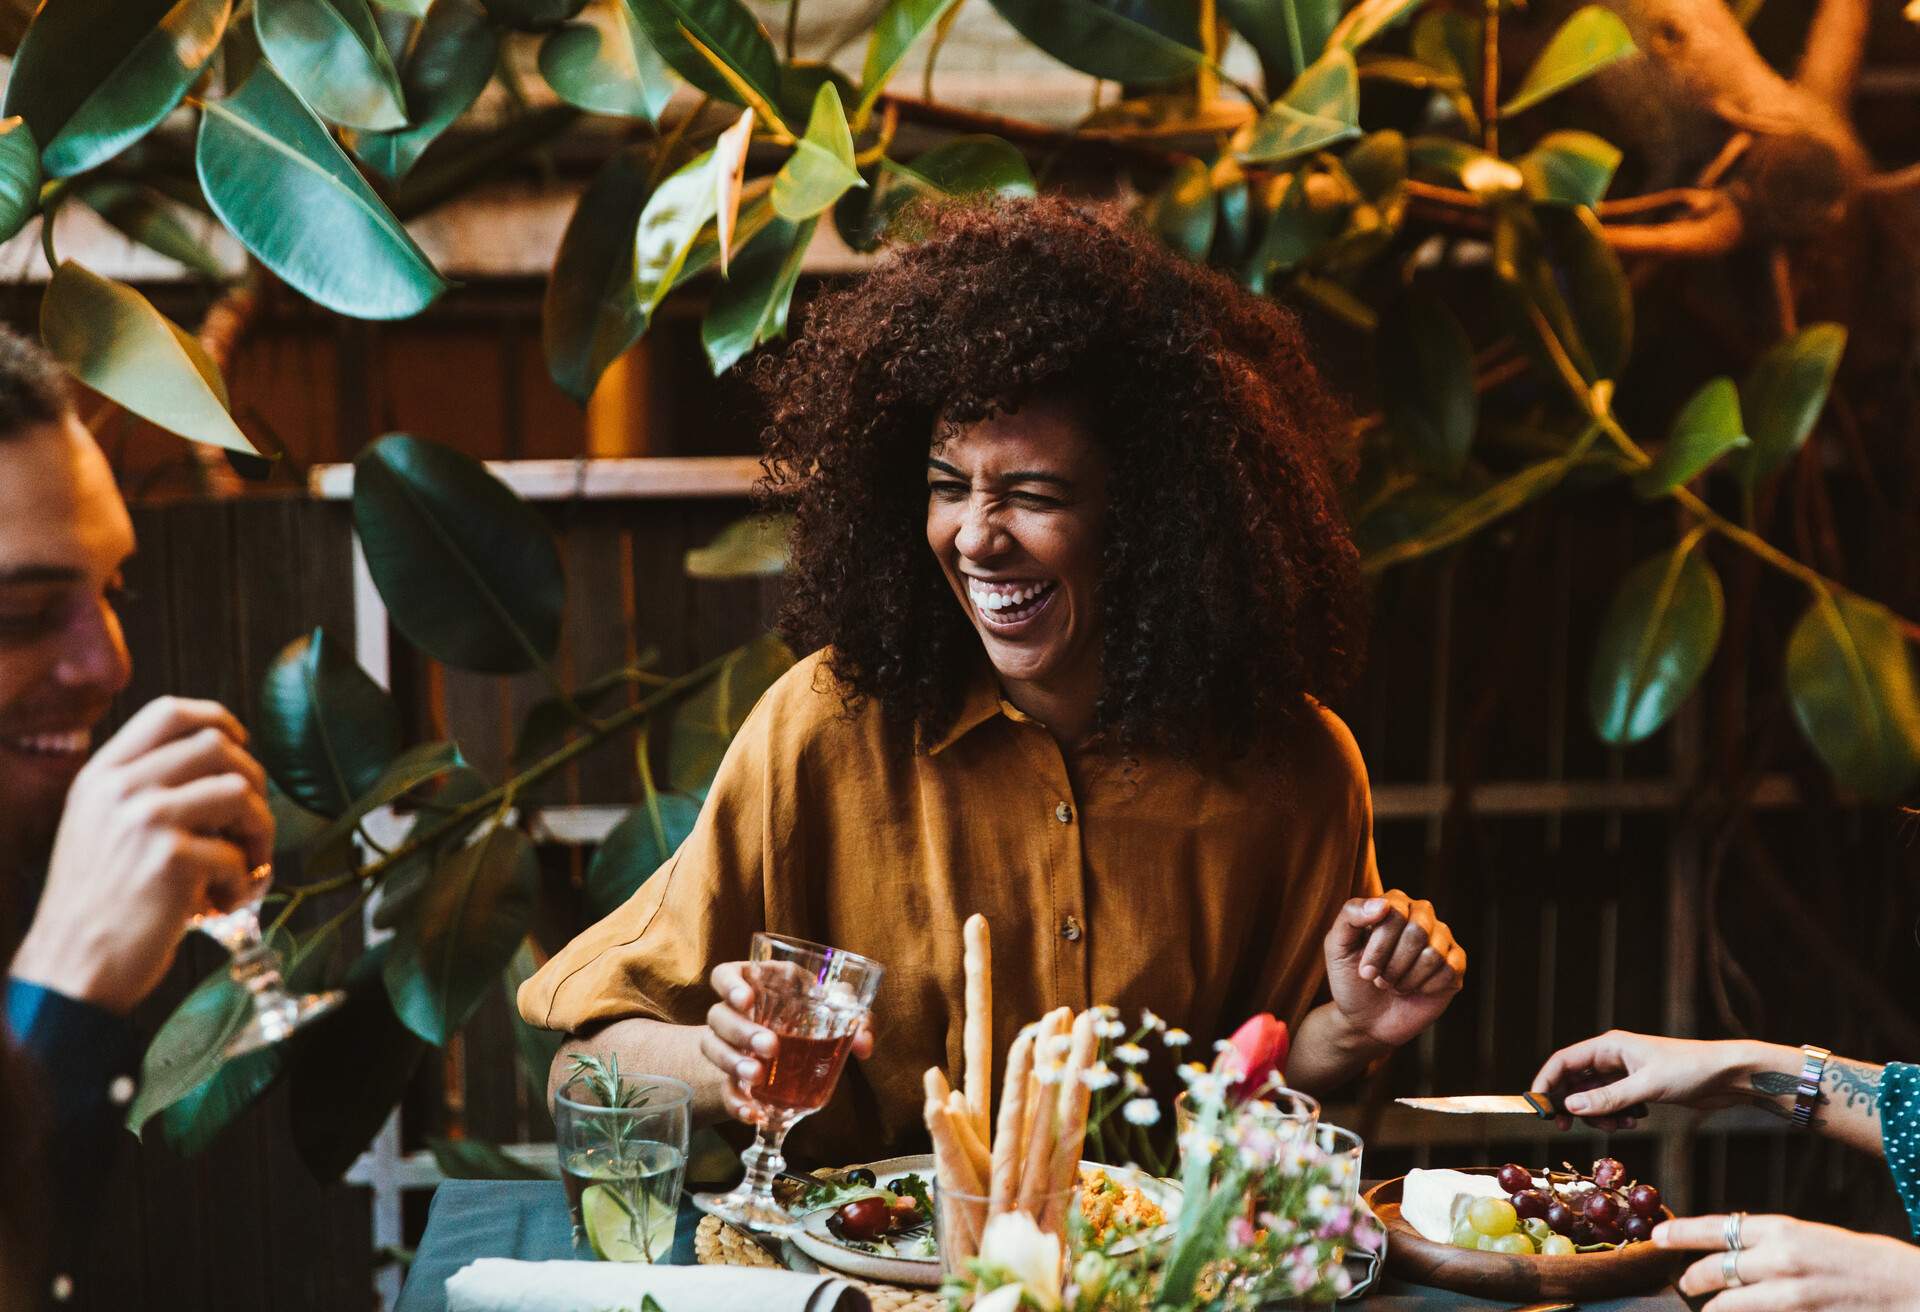 A happy woman with beautiful curly hair enjoys meals and wine with her colleagues.